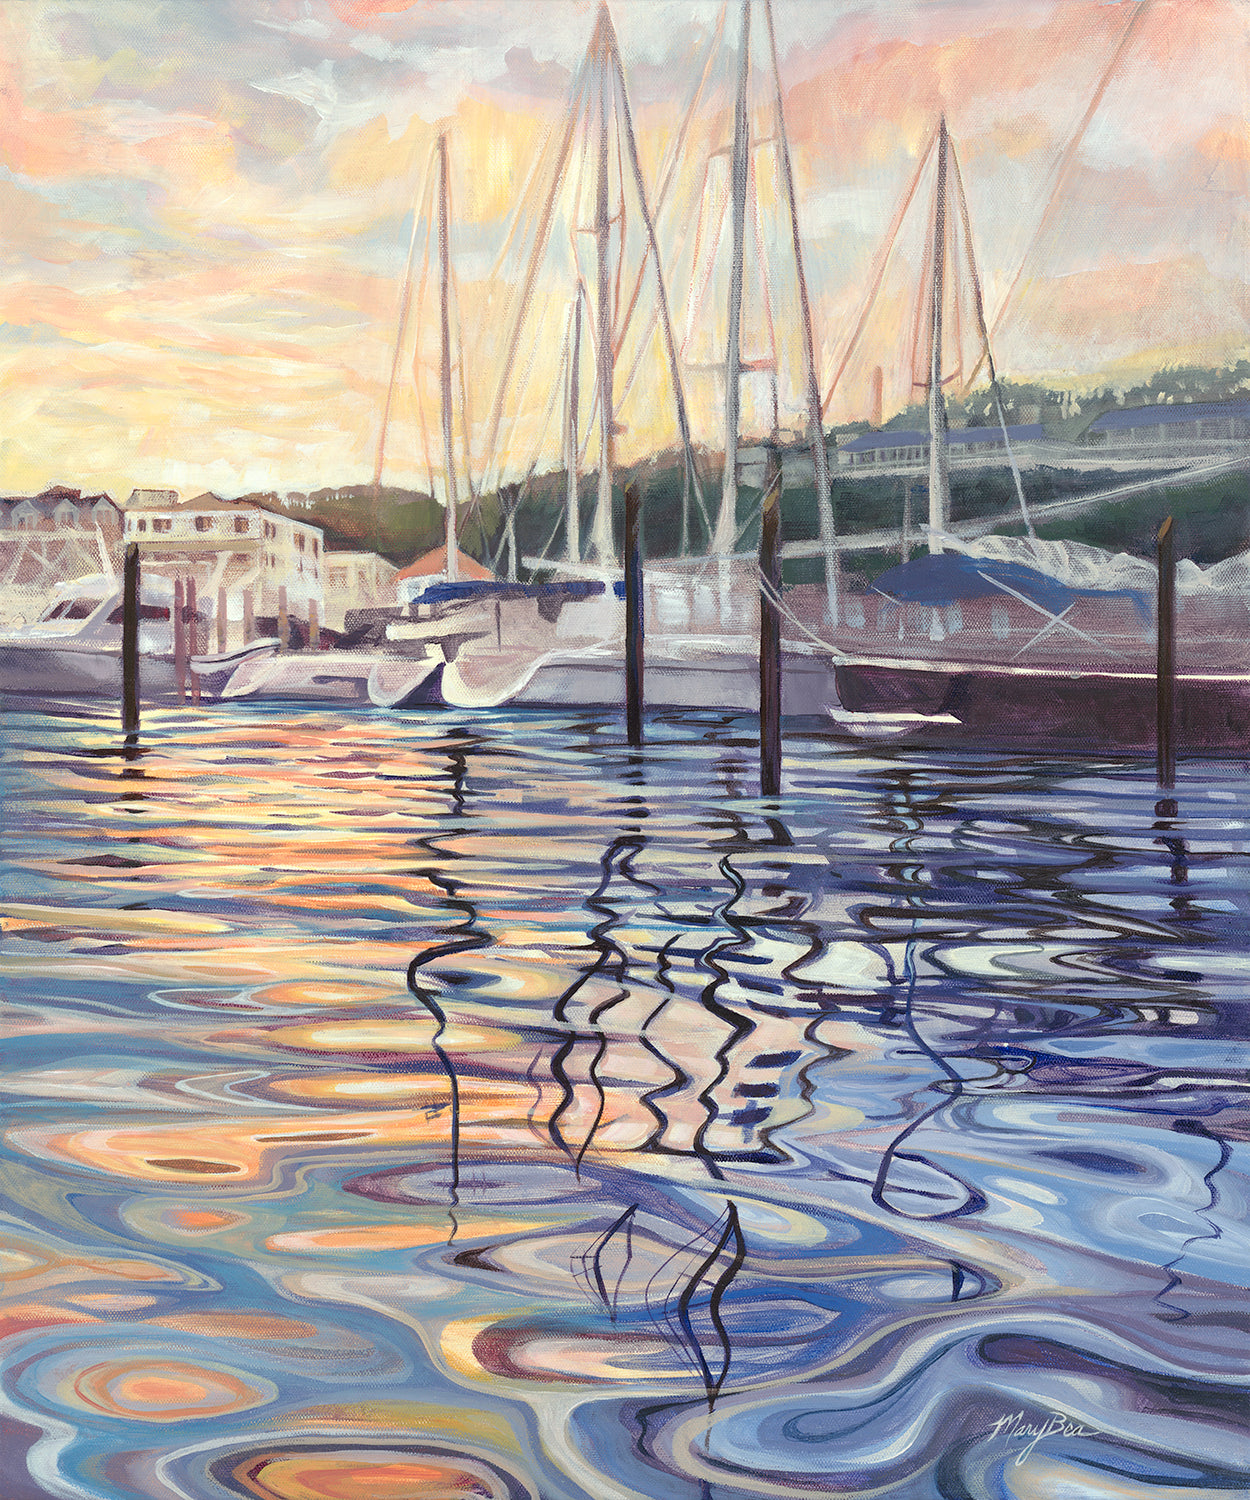 Fine Art Prints by Mary Bea McWatters